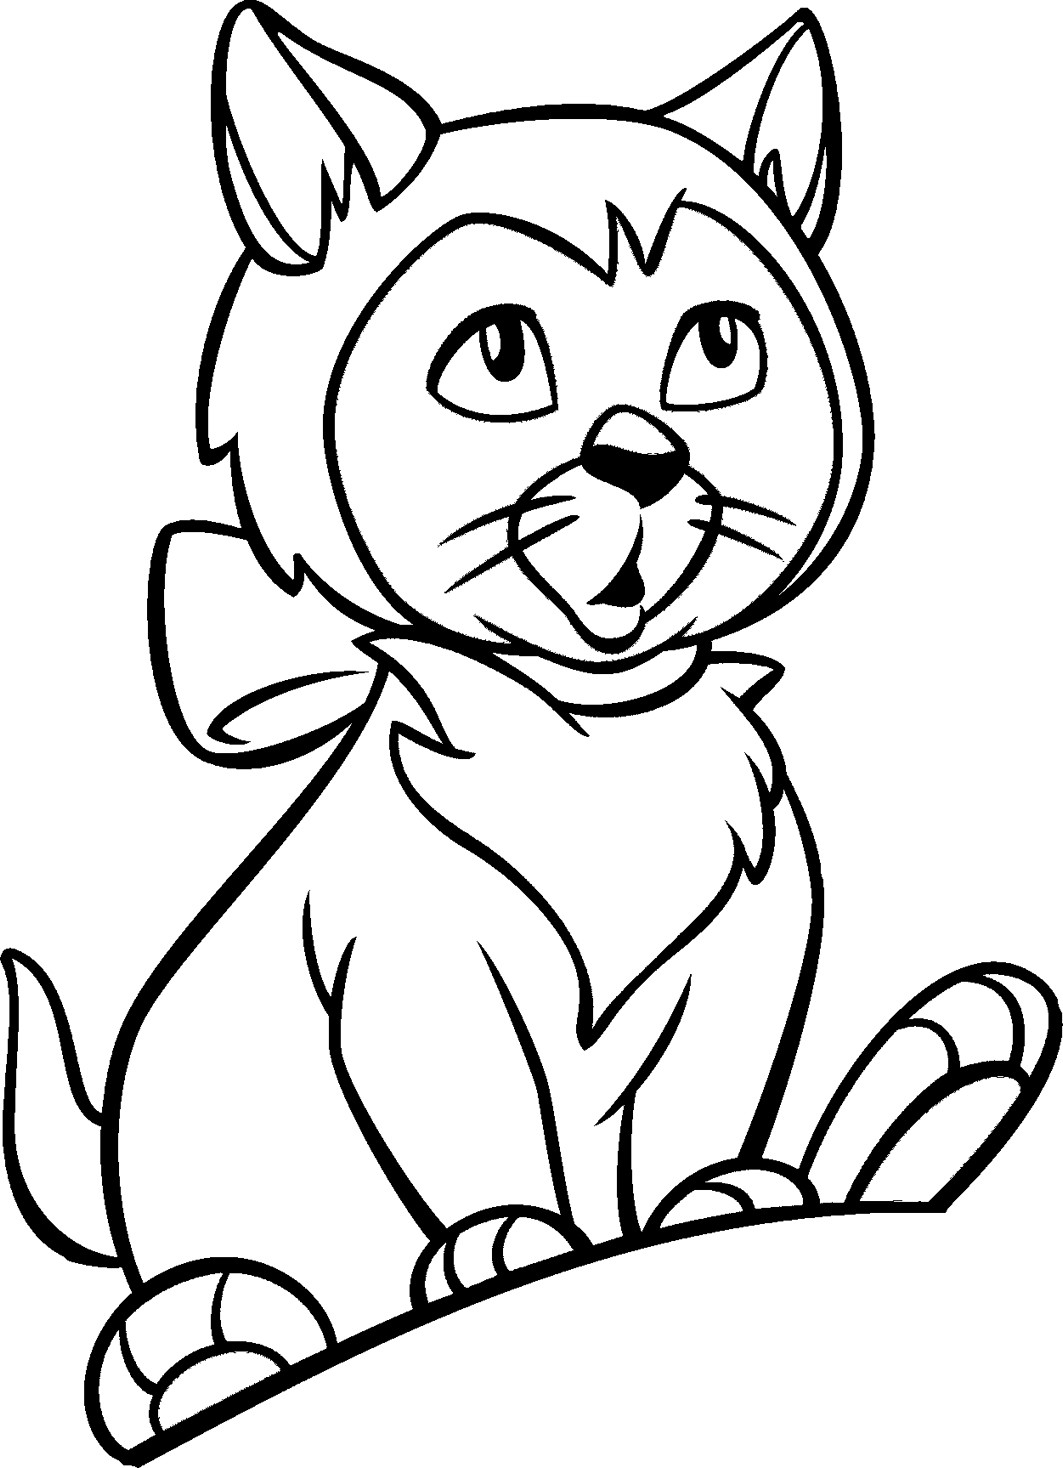 Kids Coloring Sheet
 Coloring Pages for Kids Cat Coloring Pages for Kids